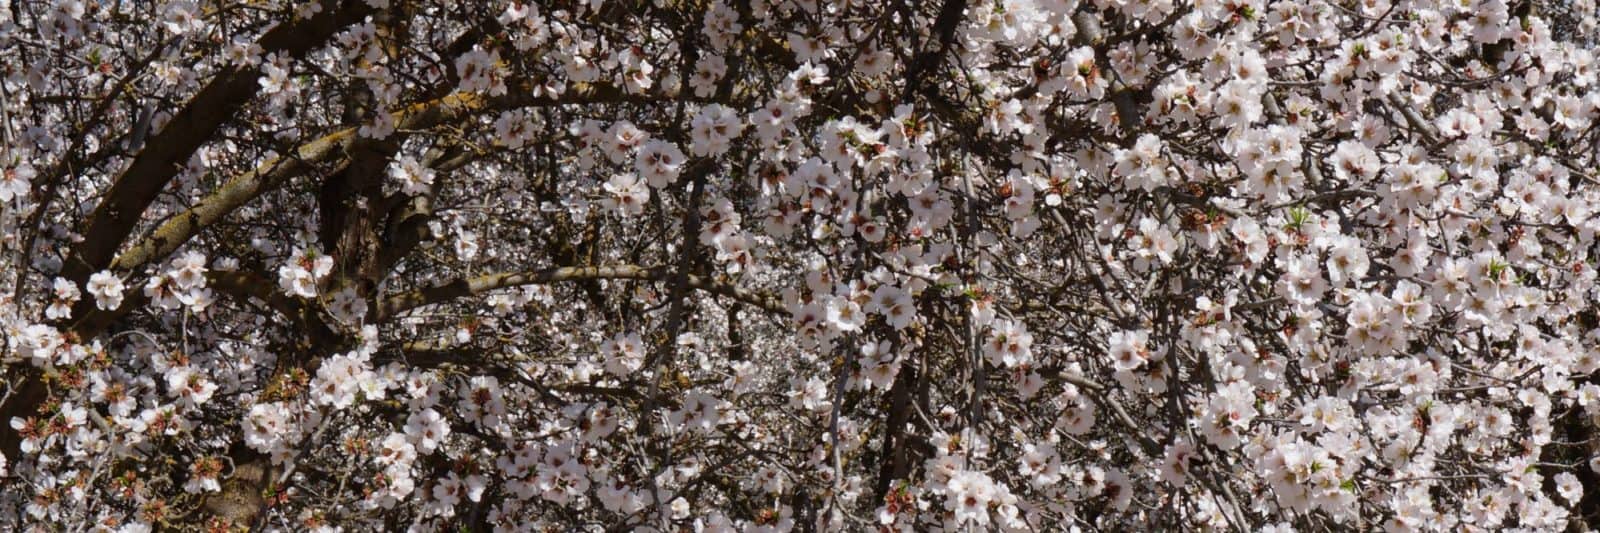 plant guide header of almond tree flowers